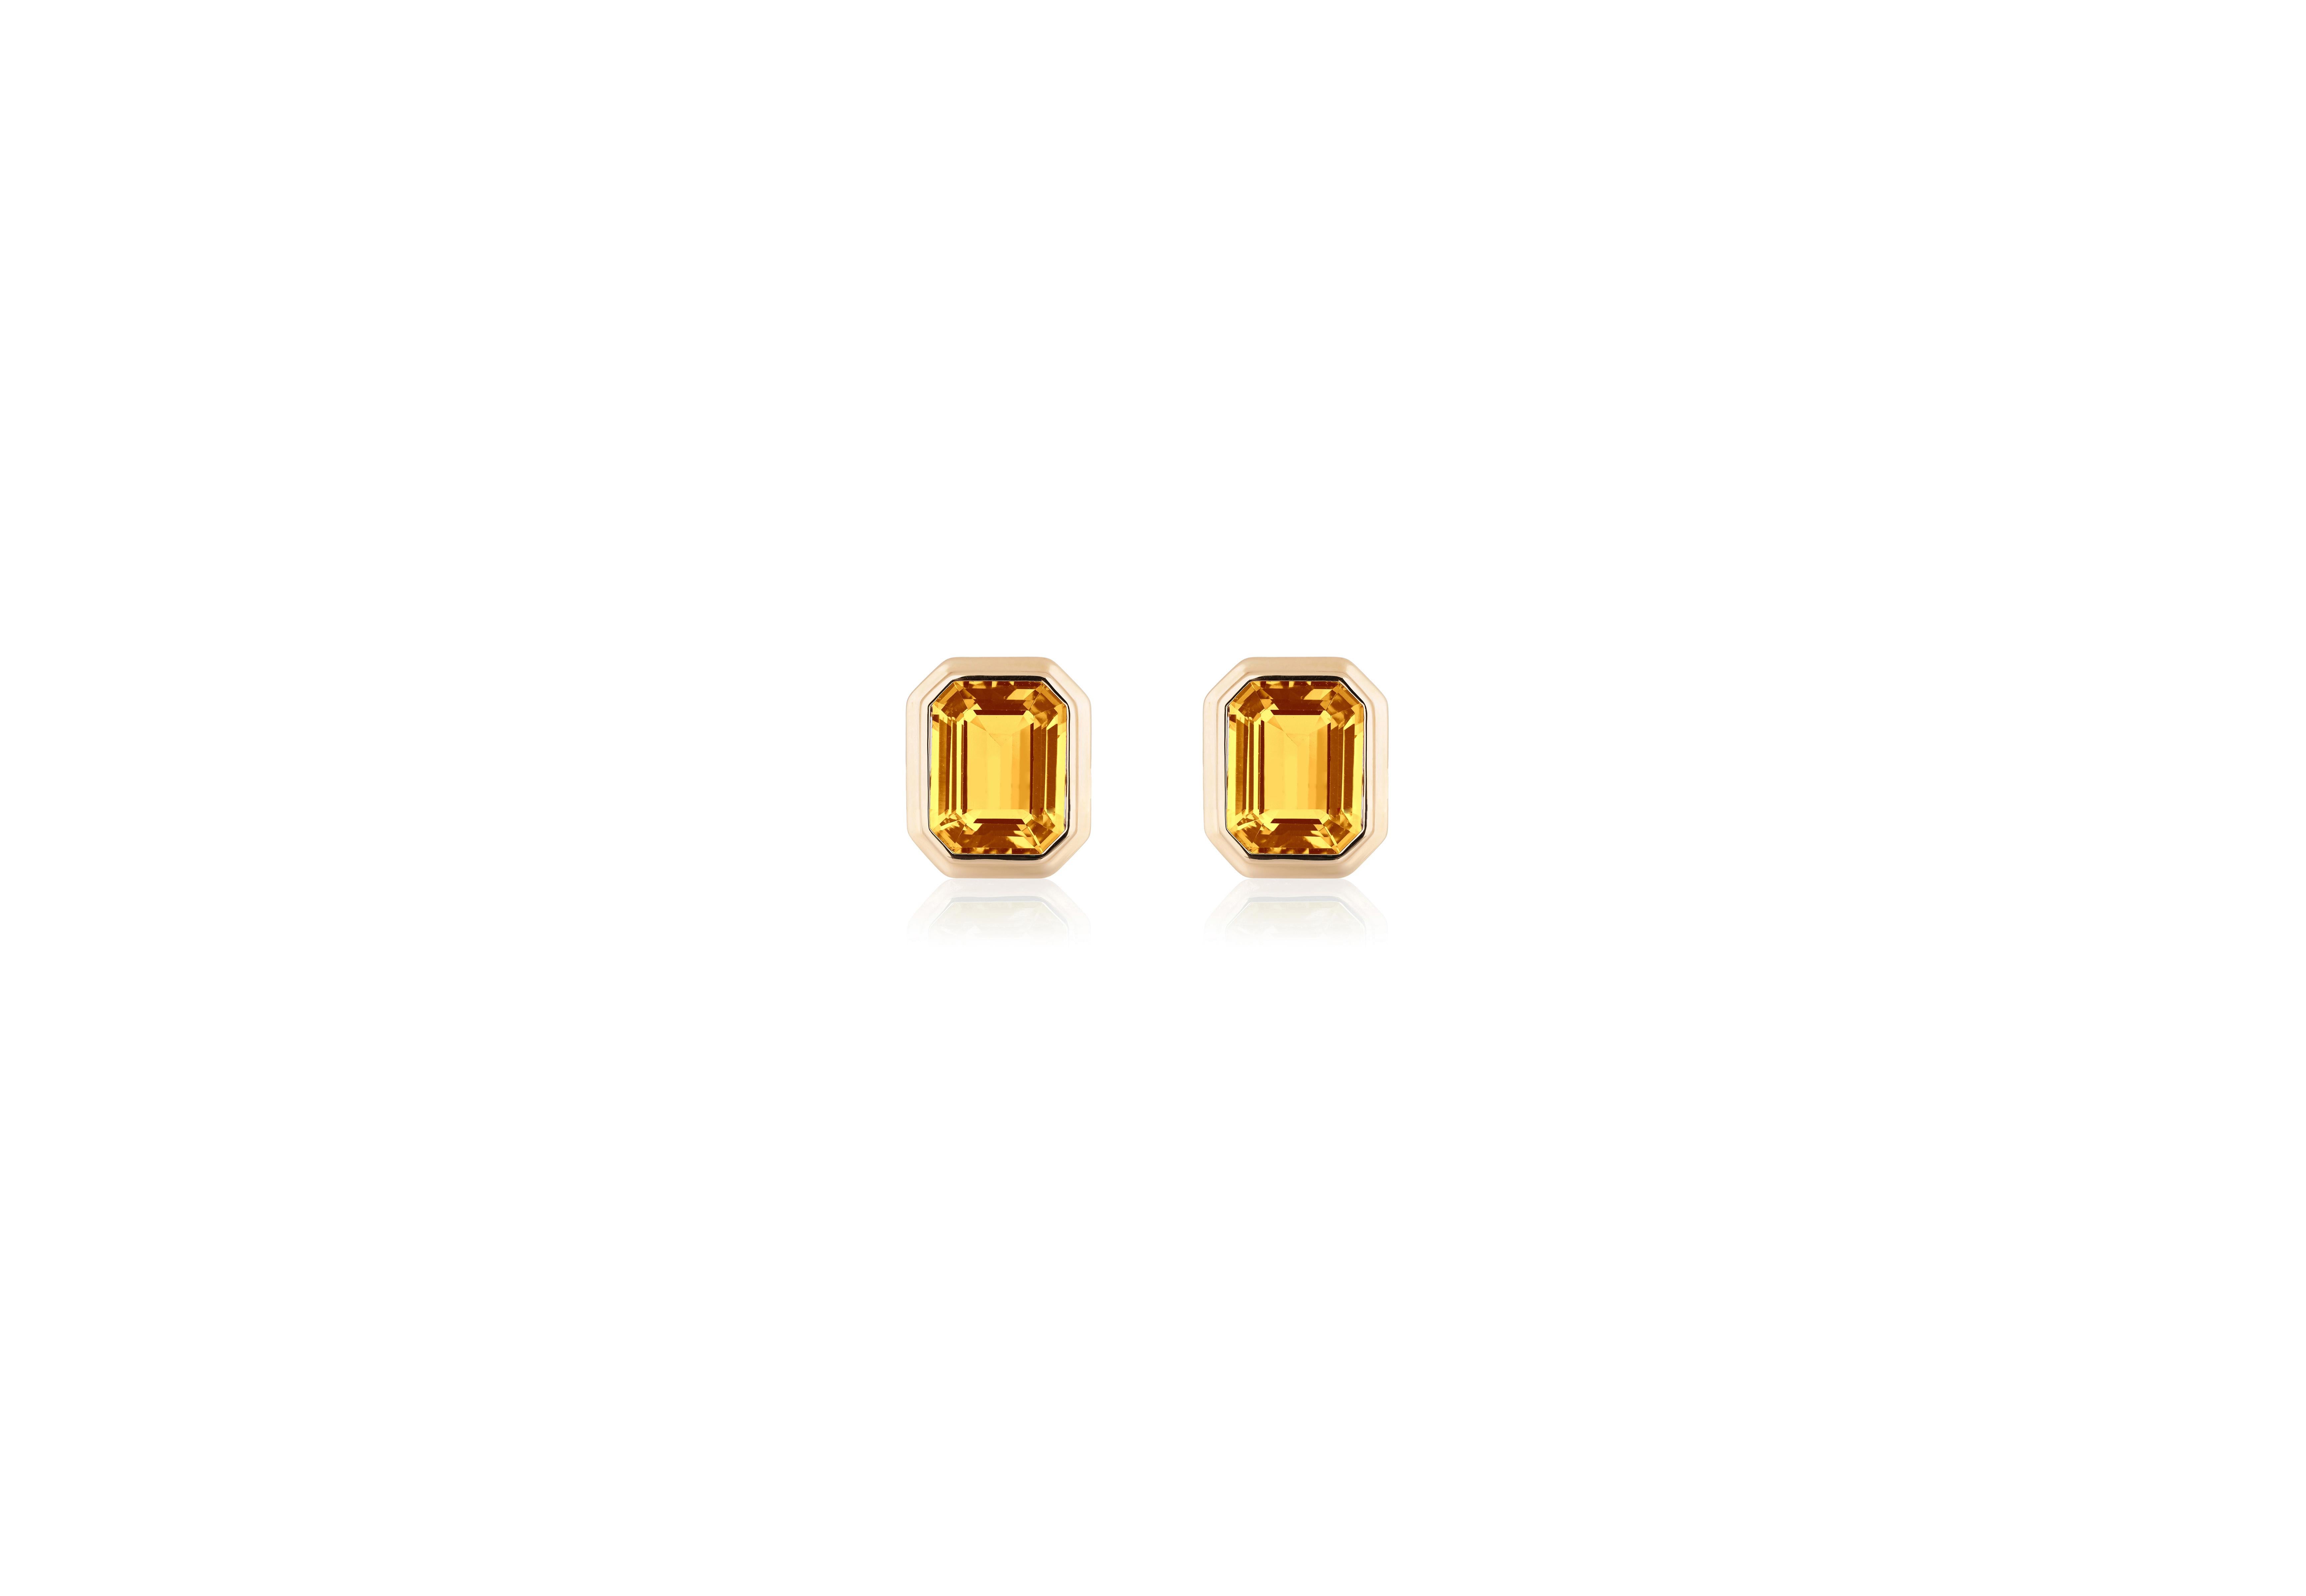 The Cirine Emerald Cut Bezel Set Stud Earrings in 18K Yellow Gold are exquisite jewelry pieces from the 'Manhattan' Collection. These elegant earrings feature a timeless emerald-cut gemstone securely held in a bezel setting, exuding a sense of